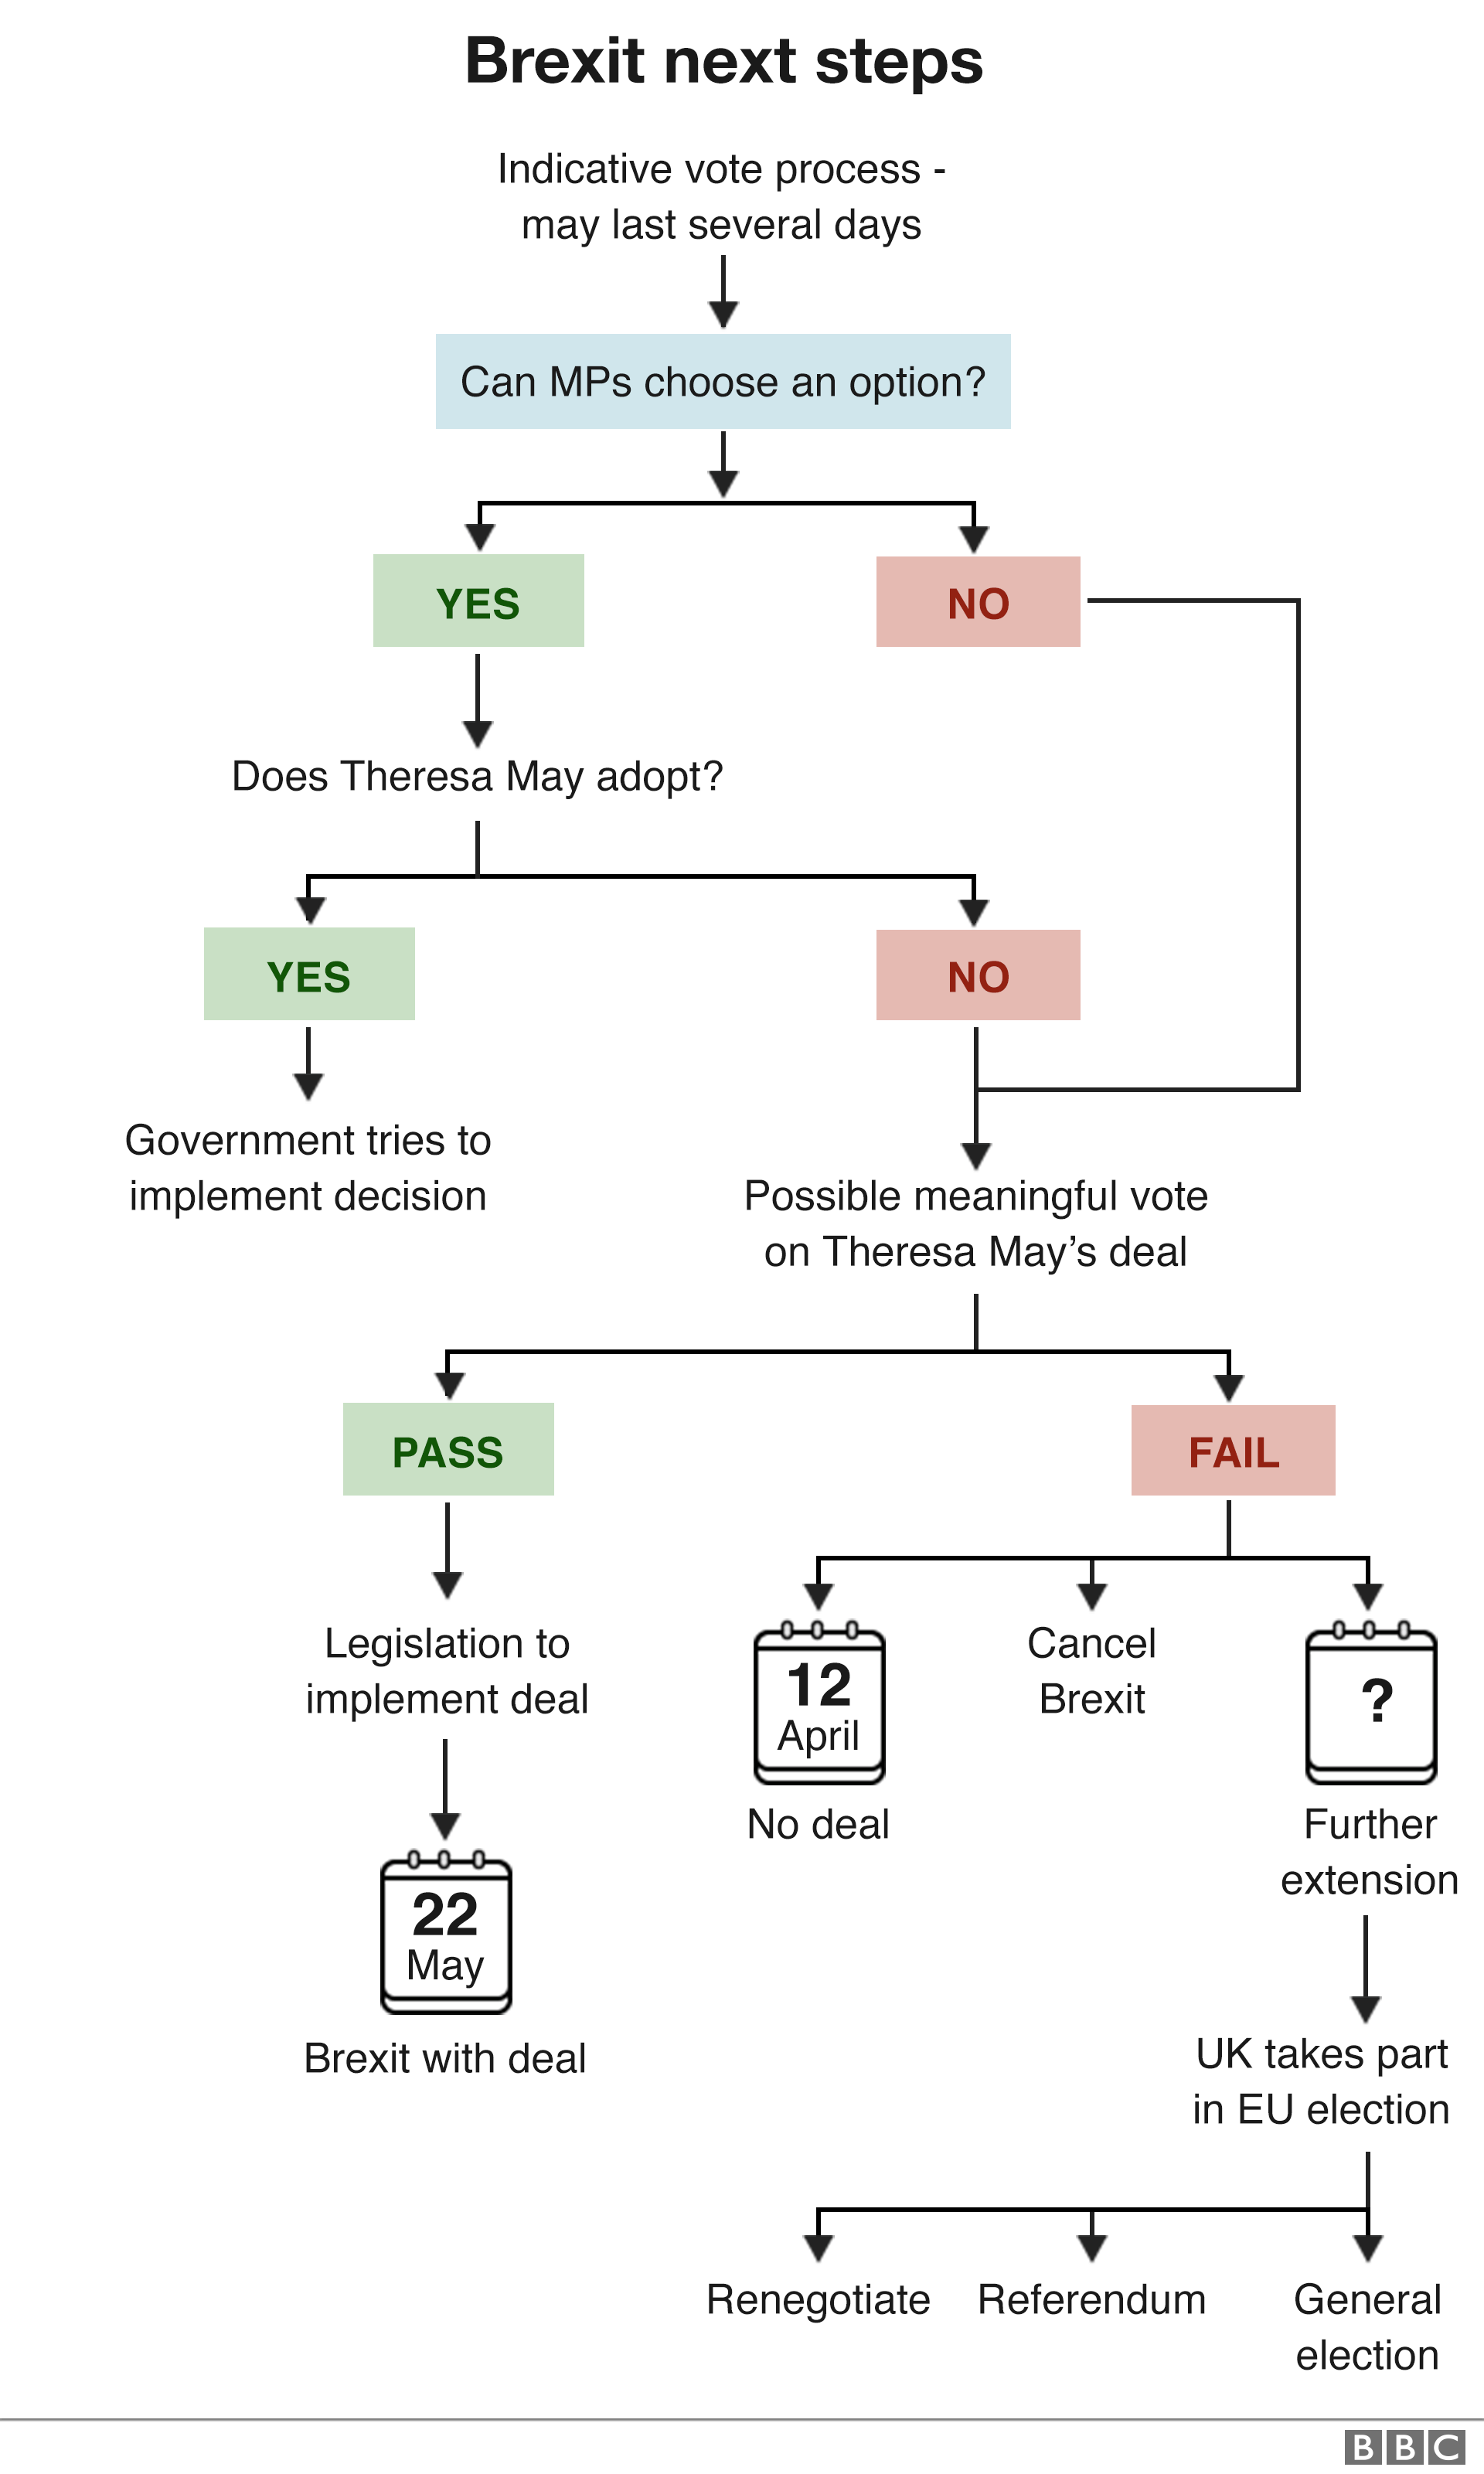 Flow chart showing the next steps for Brexit